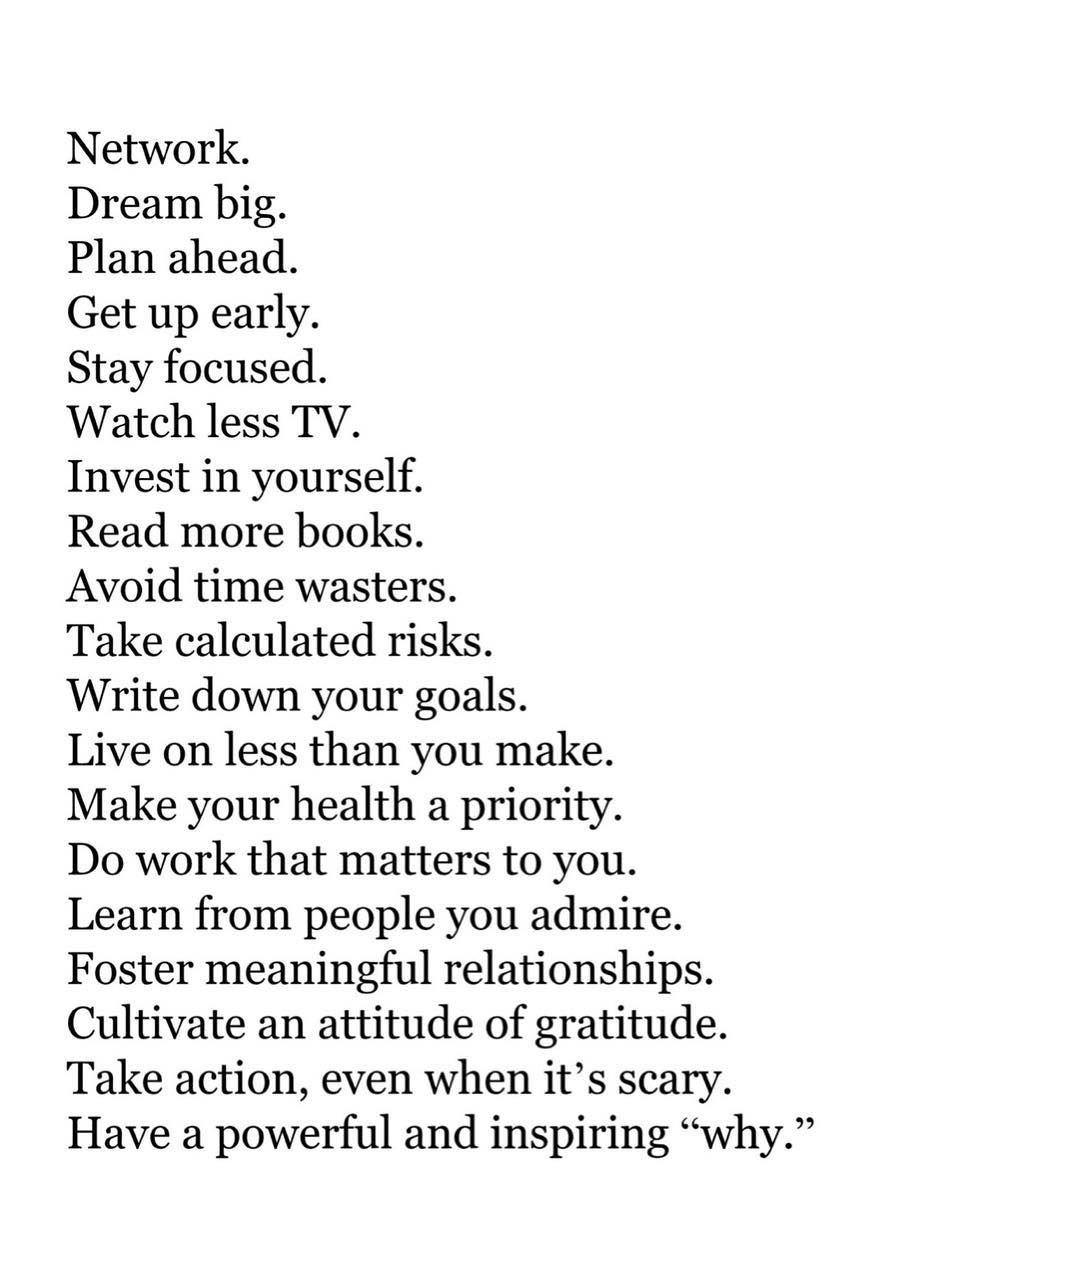 Network.

Dream big.

Plan ahead.

Get up early.

Stay focused.

Watch less TV.

Invest in yourself.

Read more books.

Avoid time wasters.

Take calculated risks.

Write down your goals.

Live on less than you make.
Make your health a priority.

Do work that matters to you.
Learn from people you admire.
Foster meaningful relationships.
Cultivate an attitude of gratitude.
Take action, even when it’s scary.
Have a powerful and inspiring “why.”